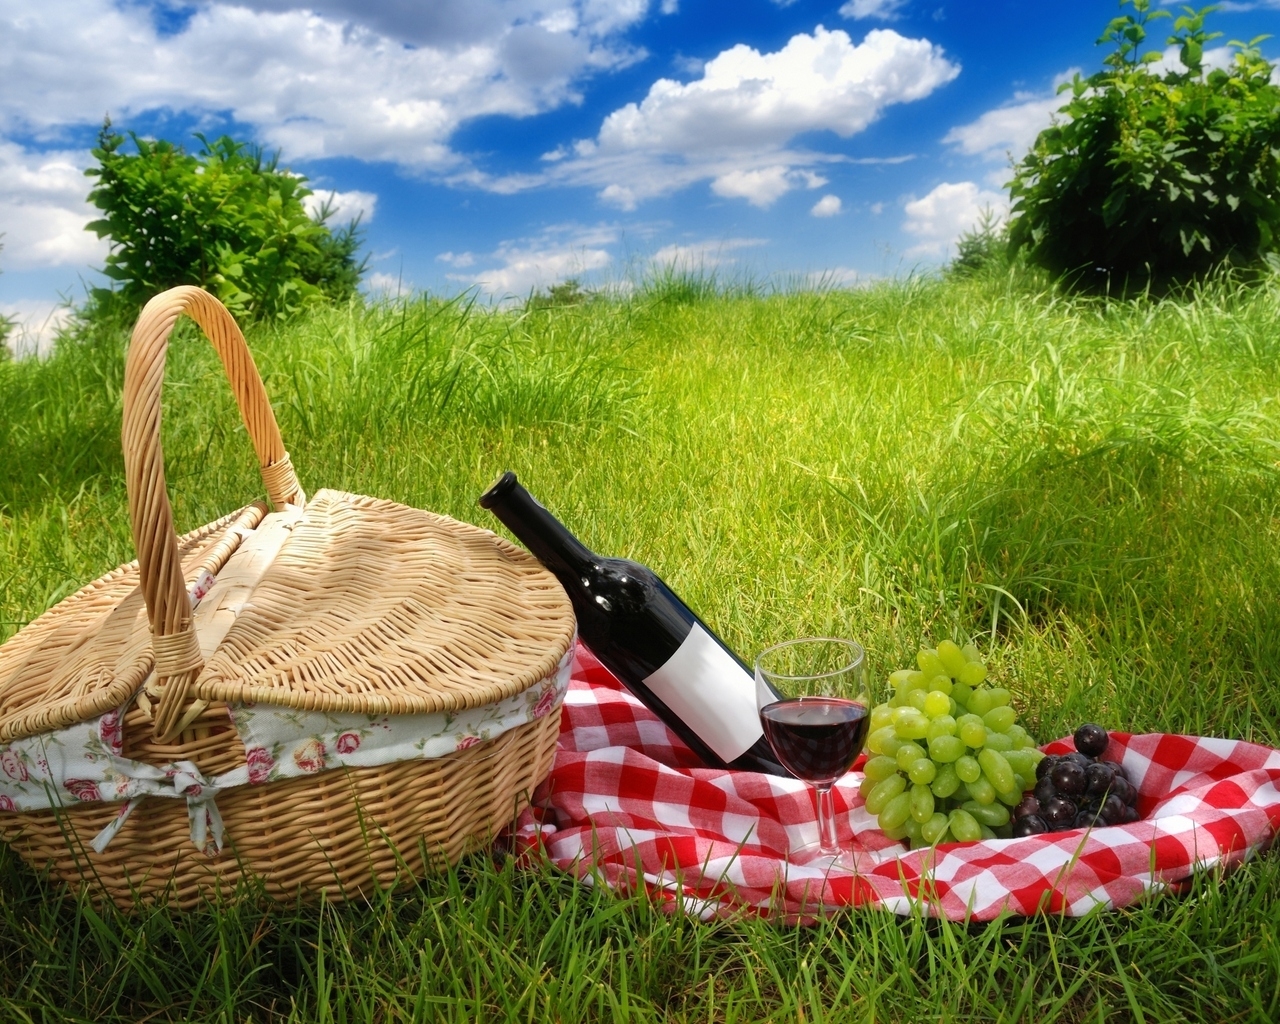 Picnic for 1280 x 1024 resolution